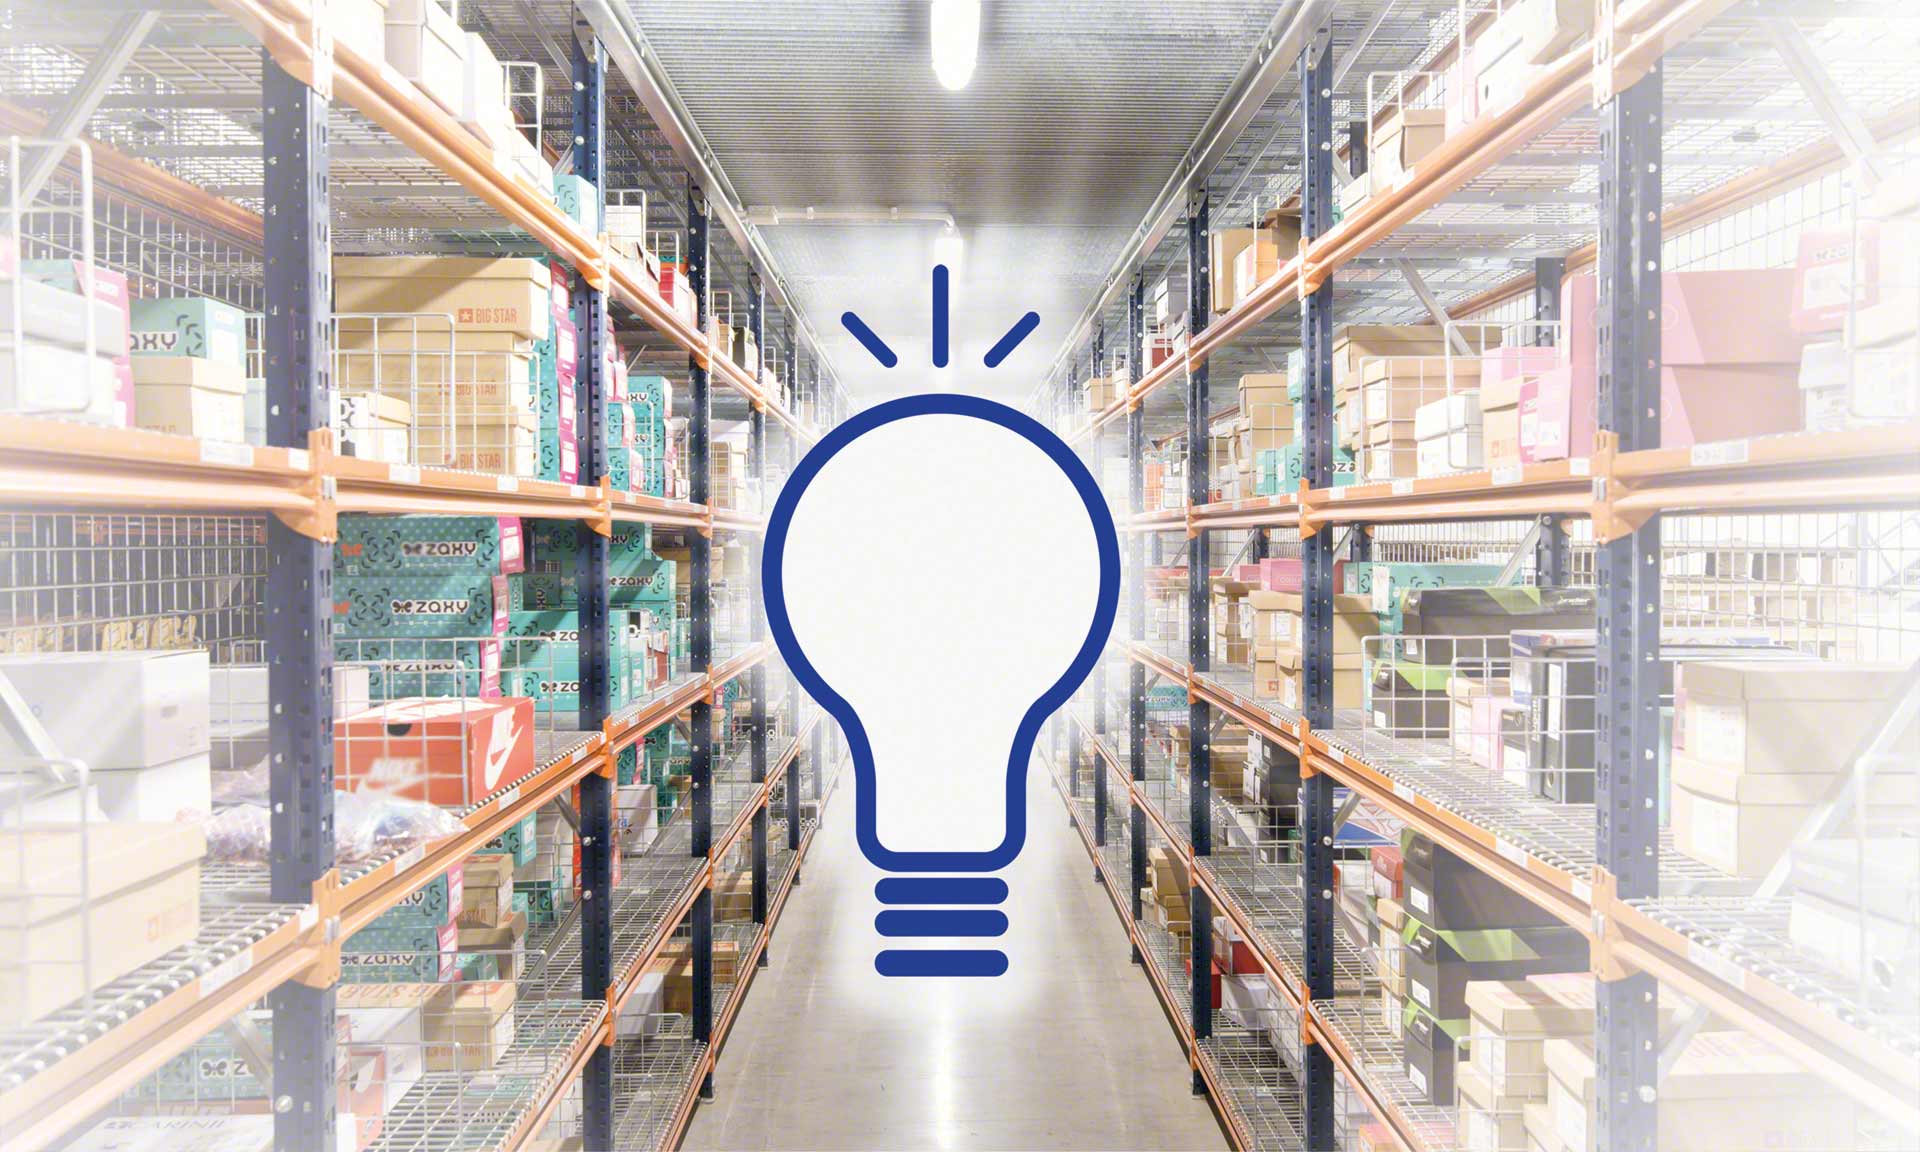 Warehouse lighting facilitates the work of the operators and improves safety